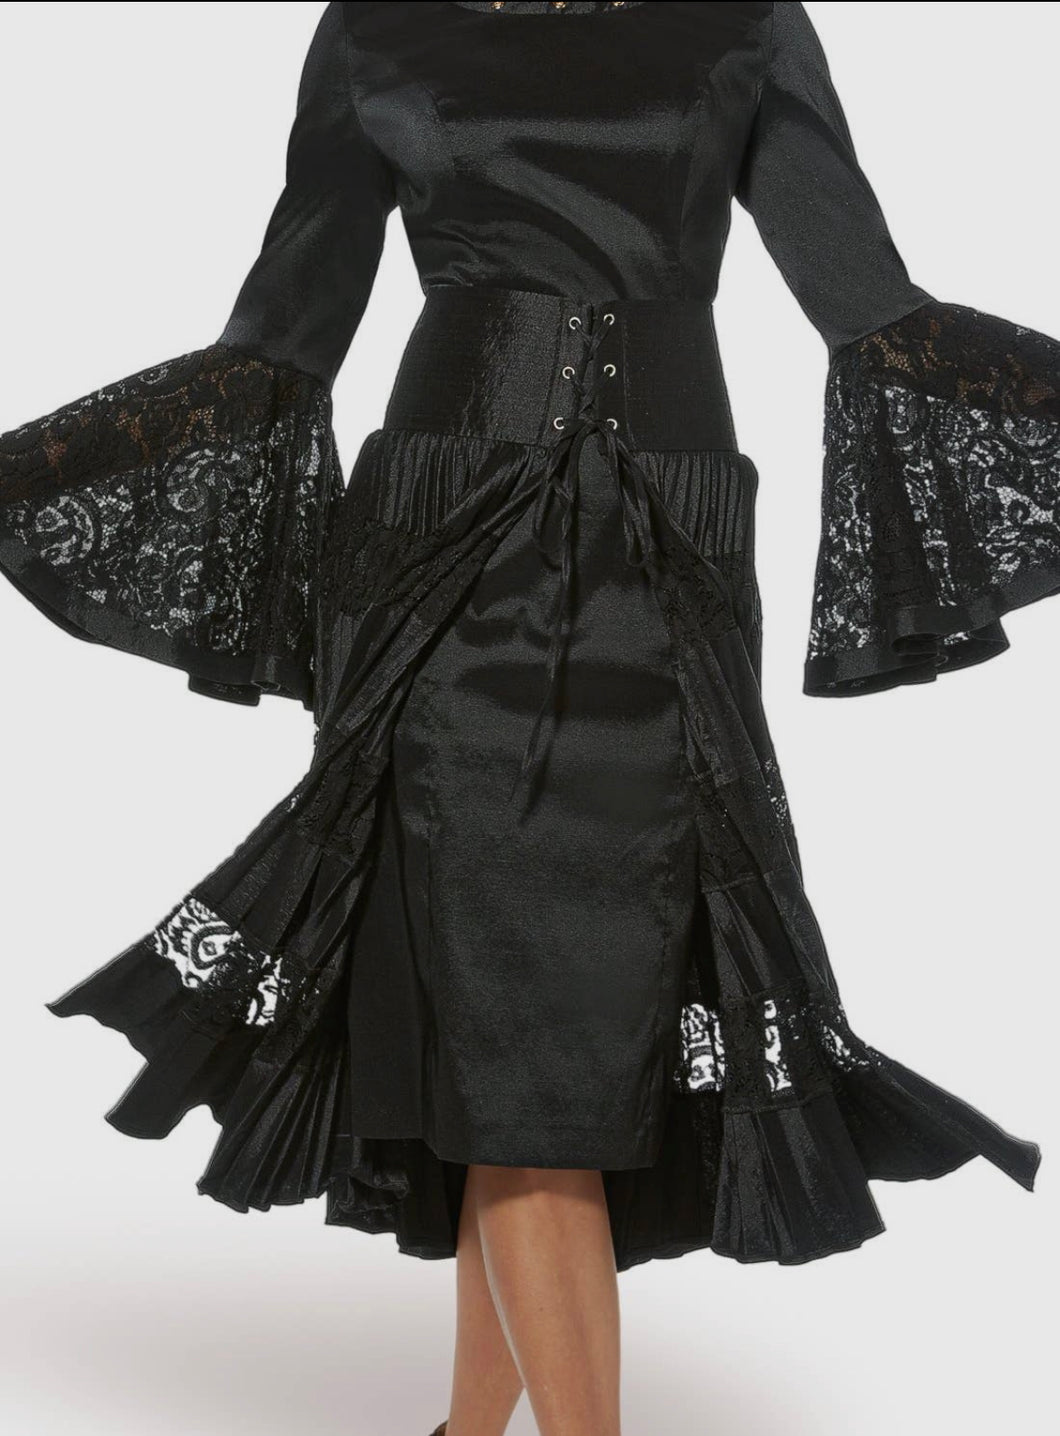 Black Pleated Fabric and Lace Skirt